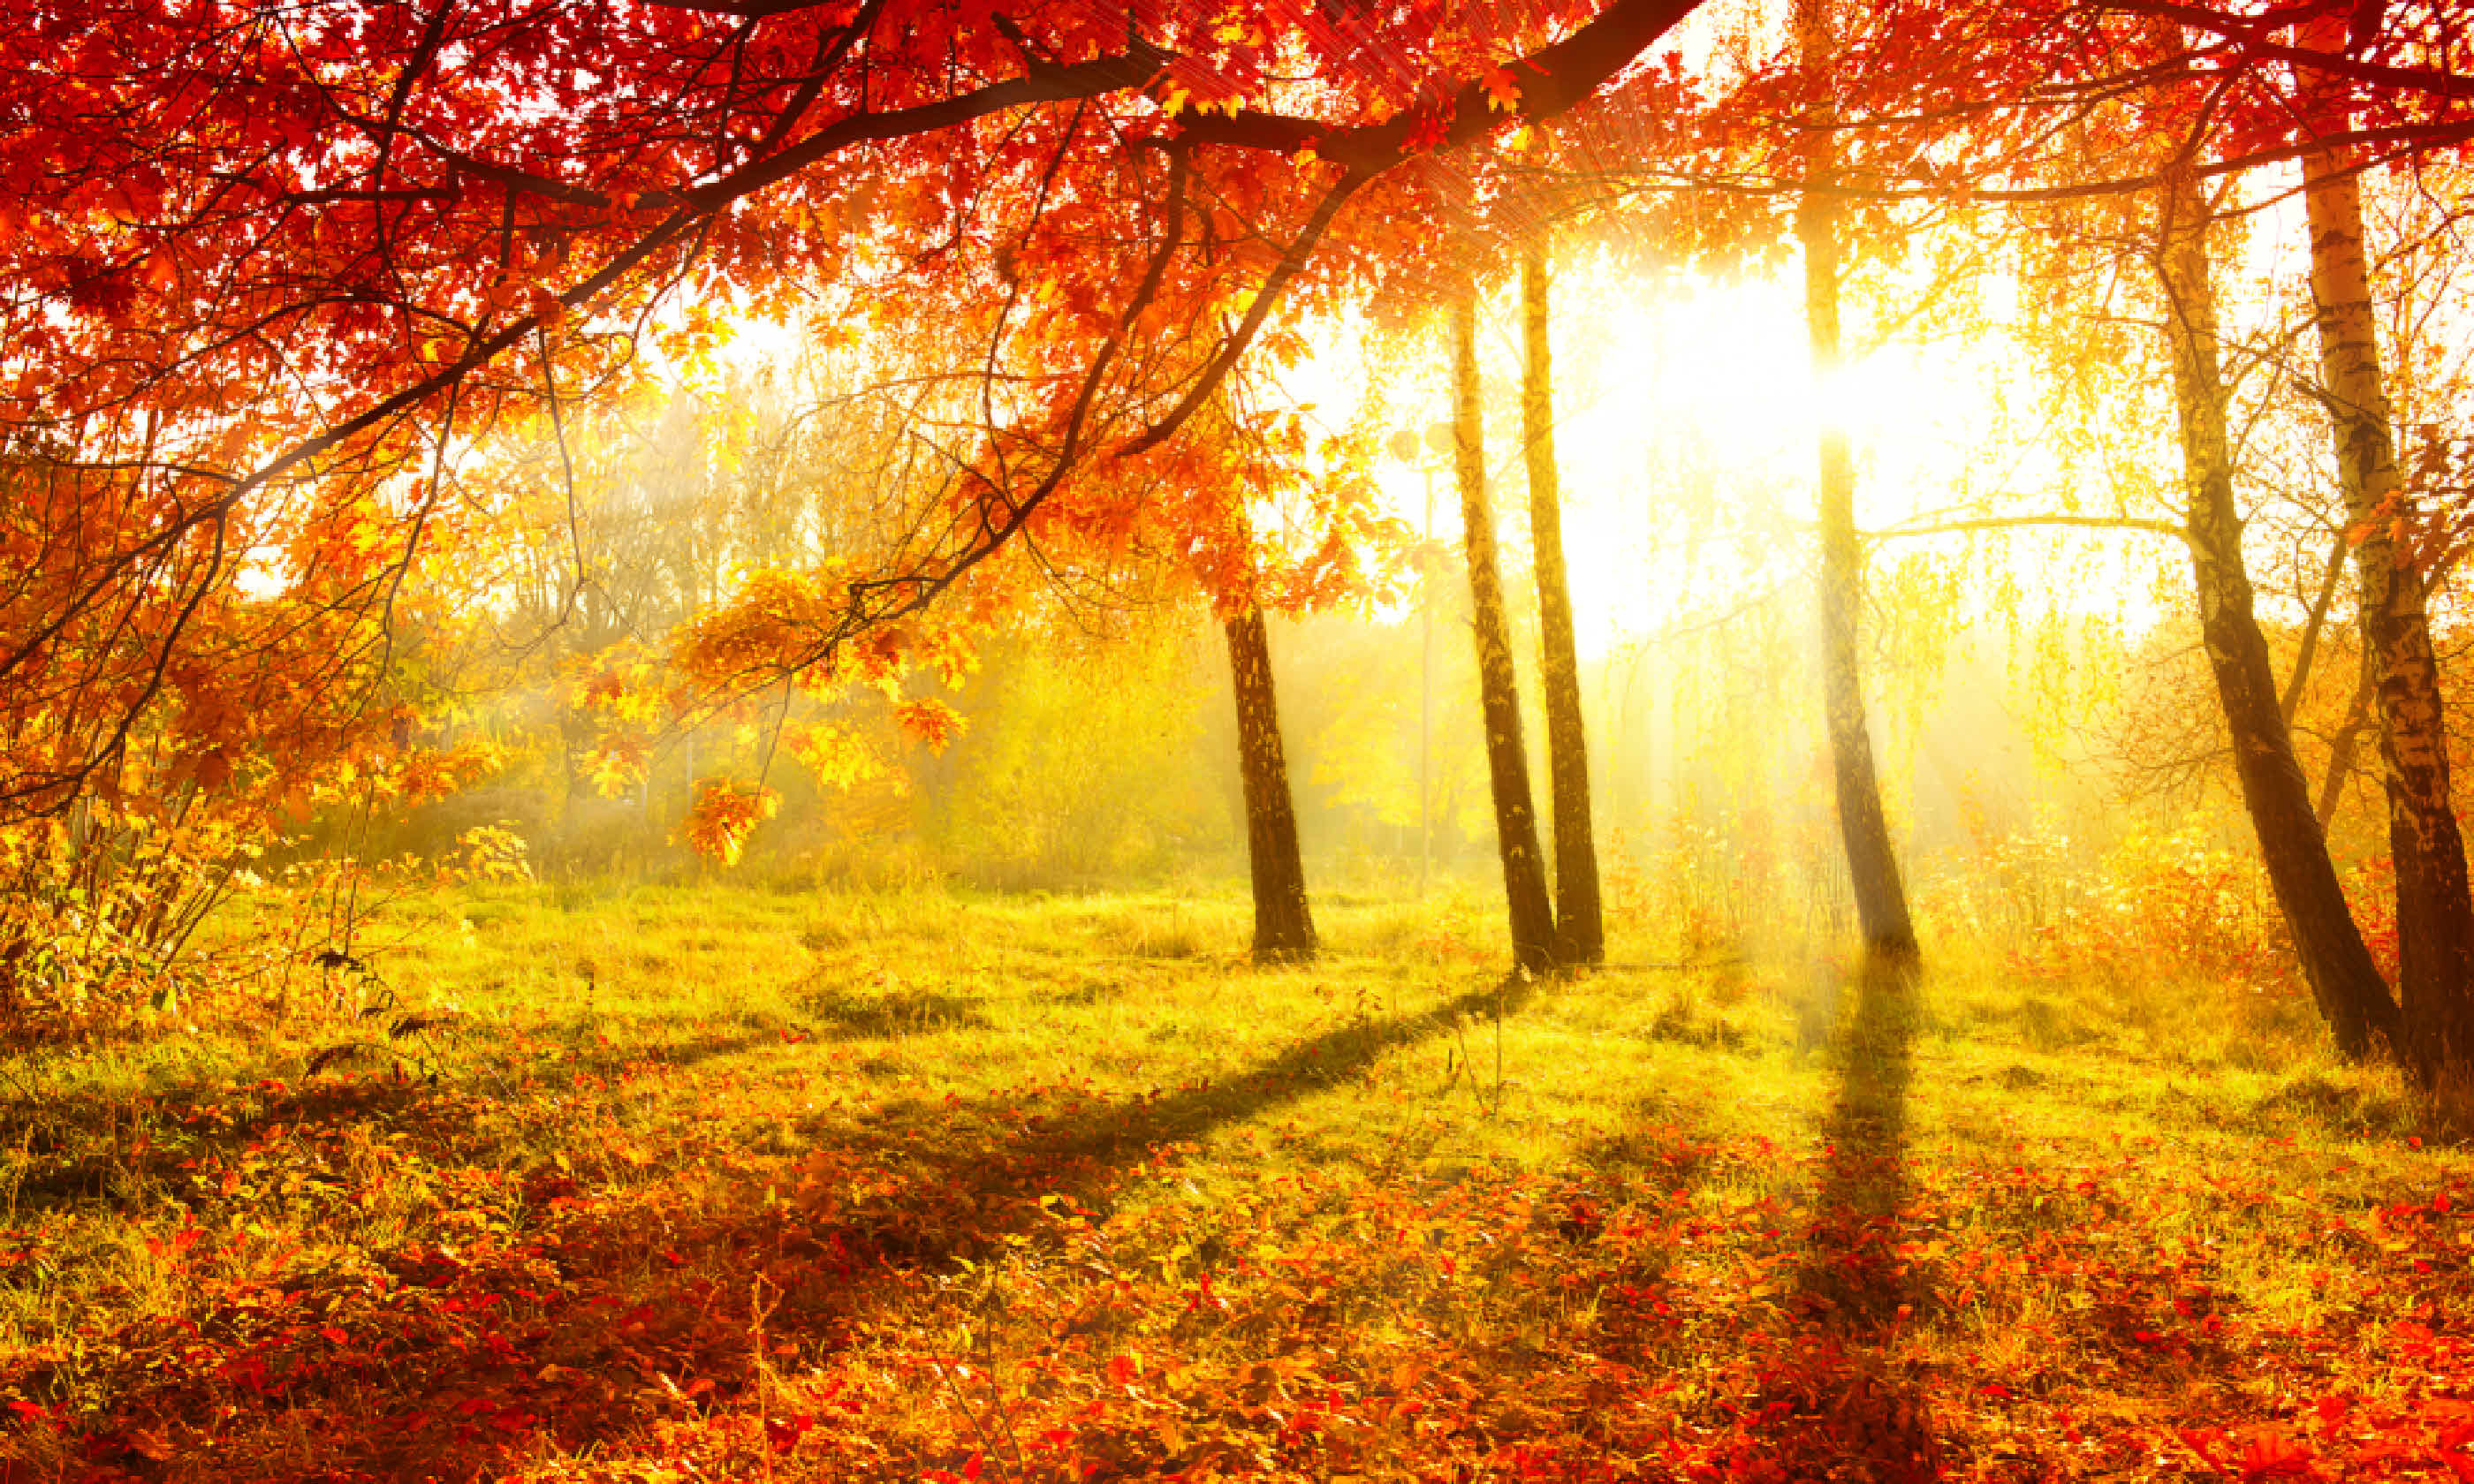 Autumn Trees and Leaves (Shutterstock: see credit below)